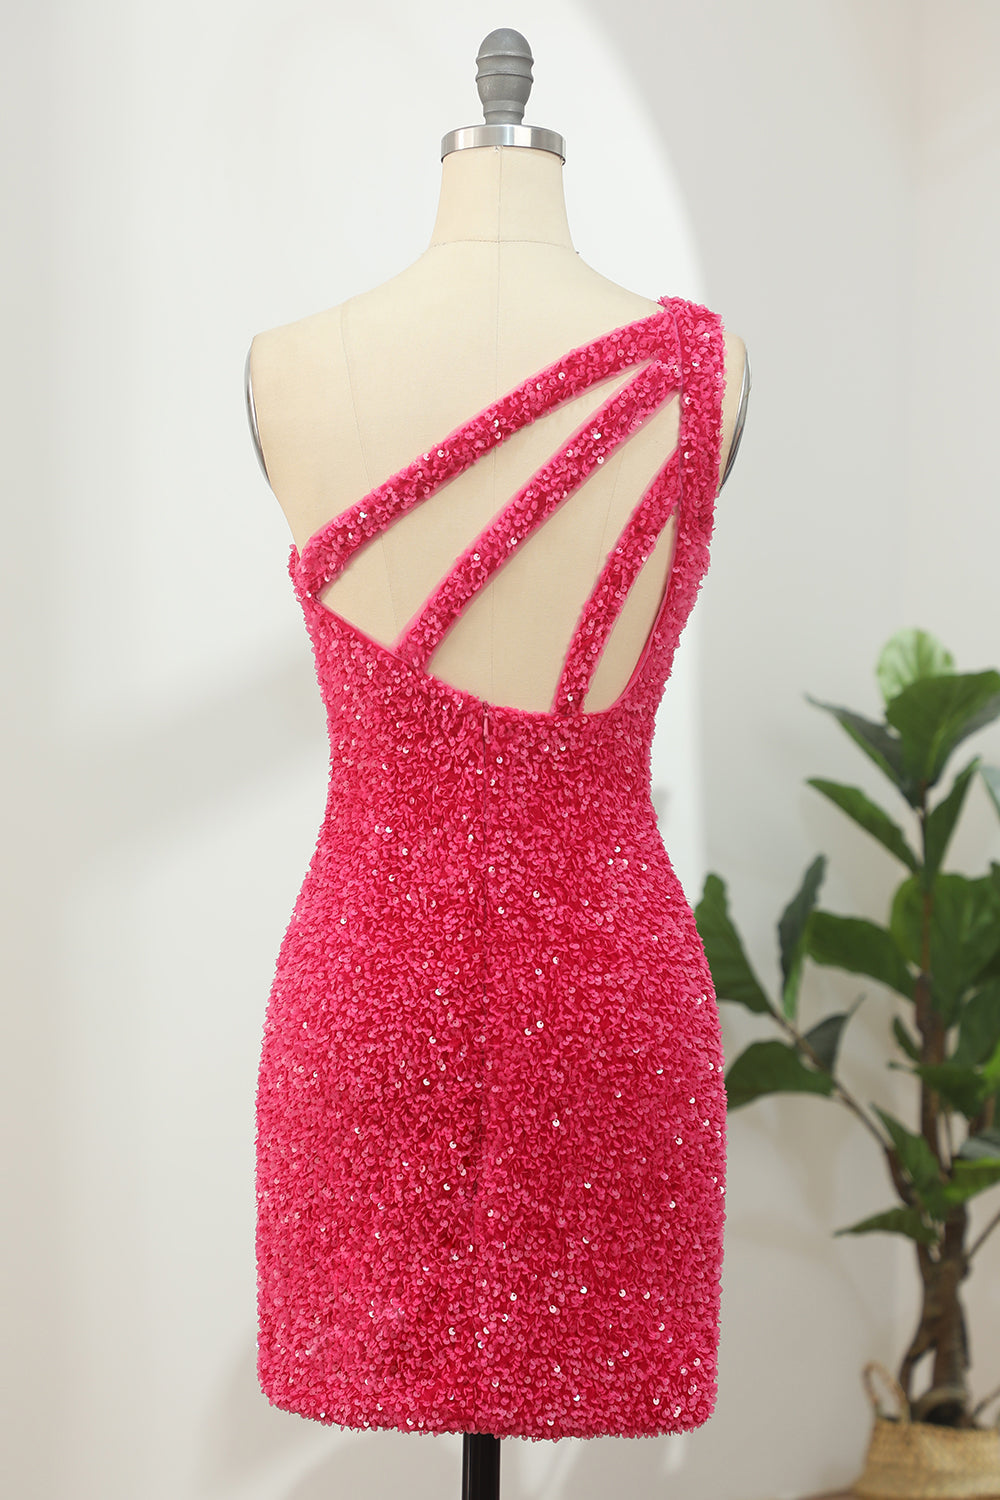 Sheath One Shoulder Fuchsia Short Homecoming Dress with Appliques